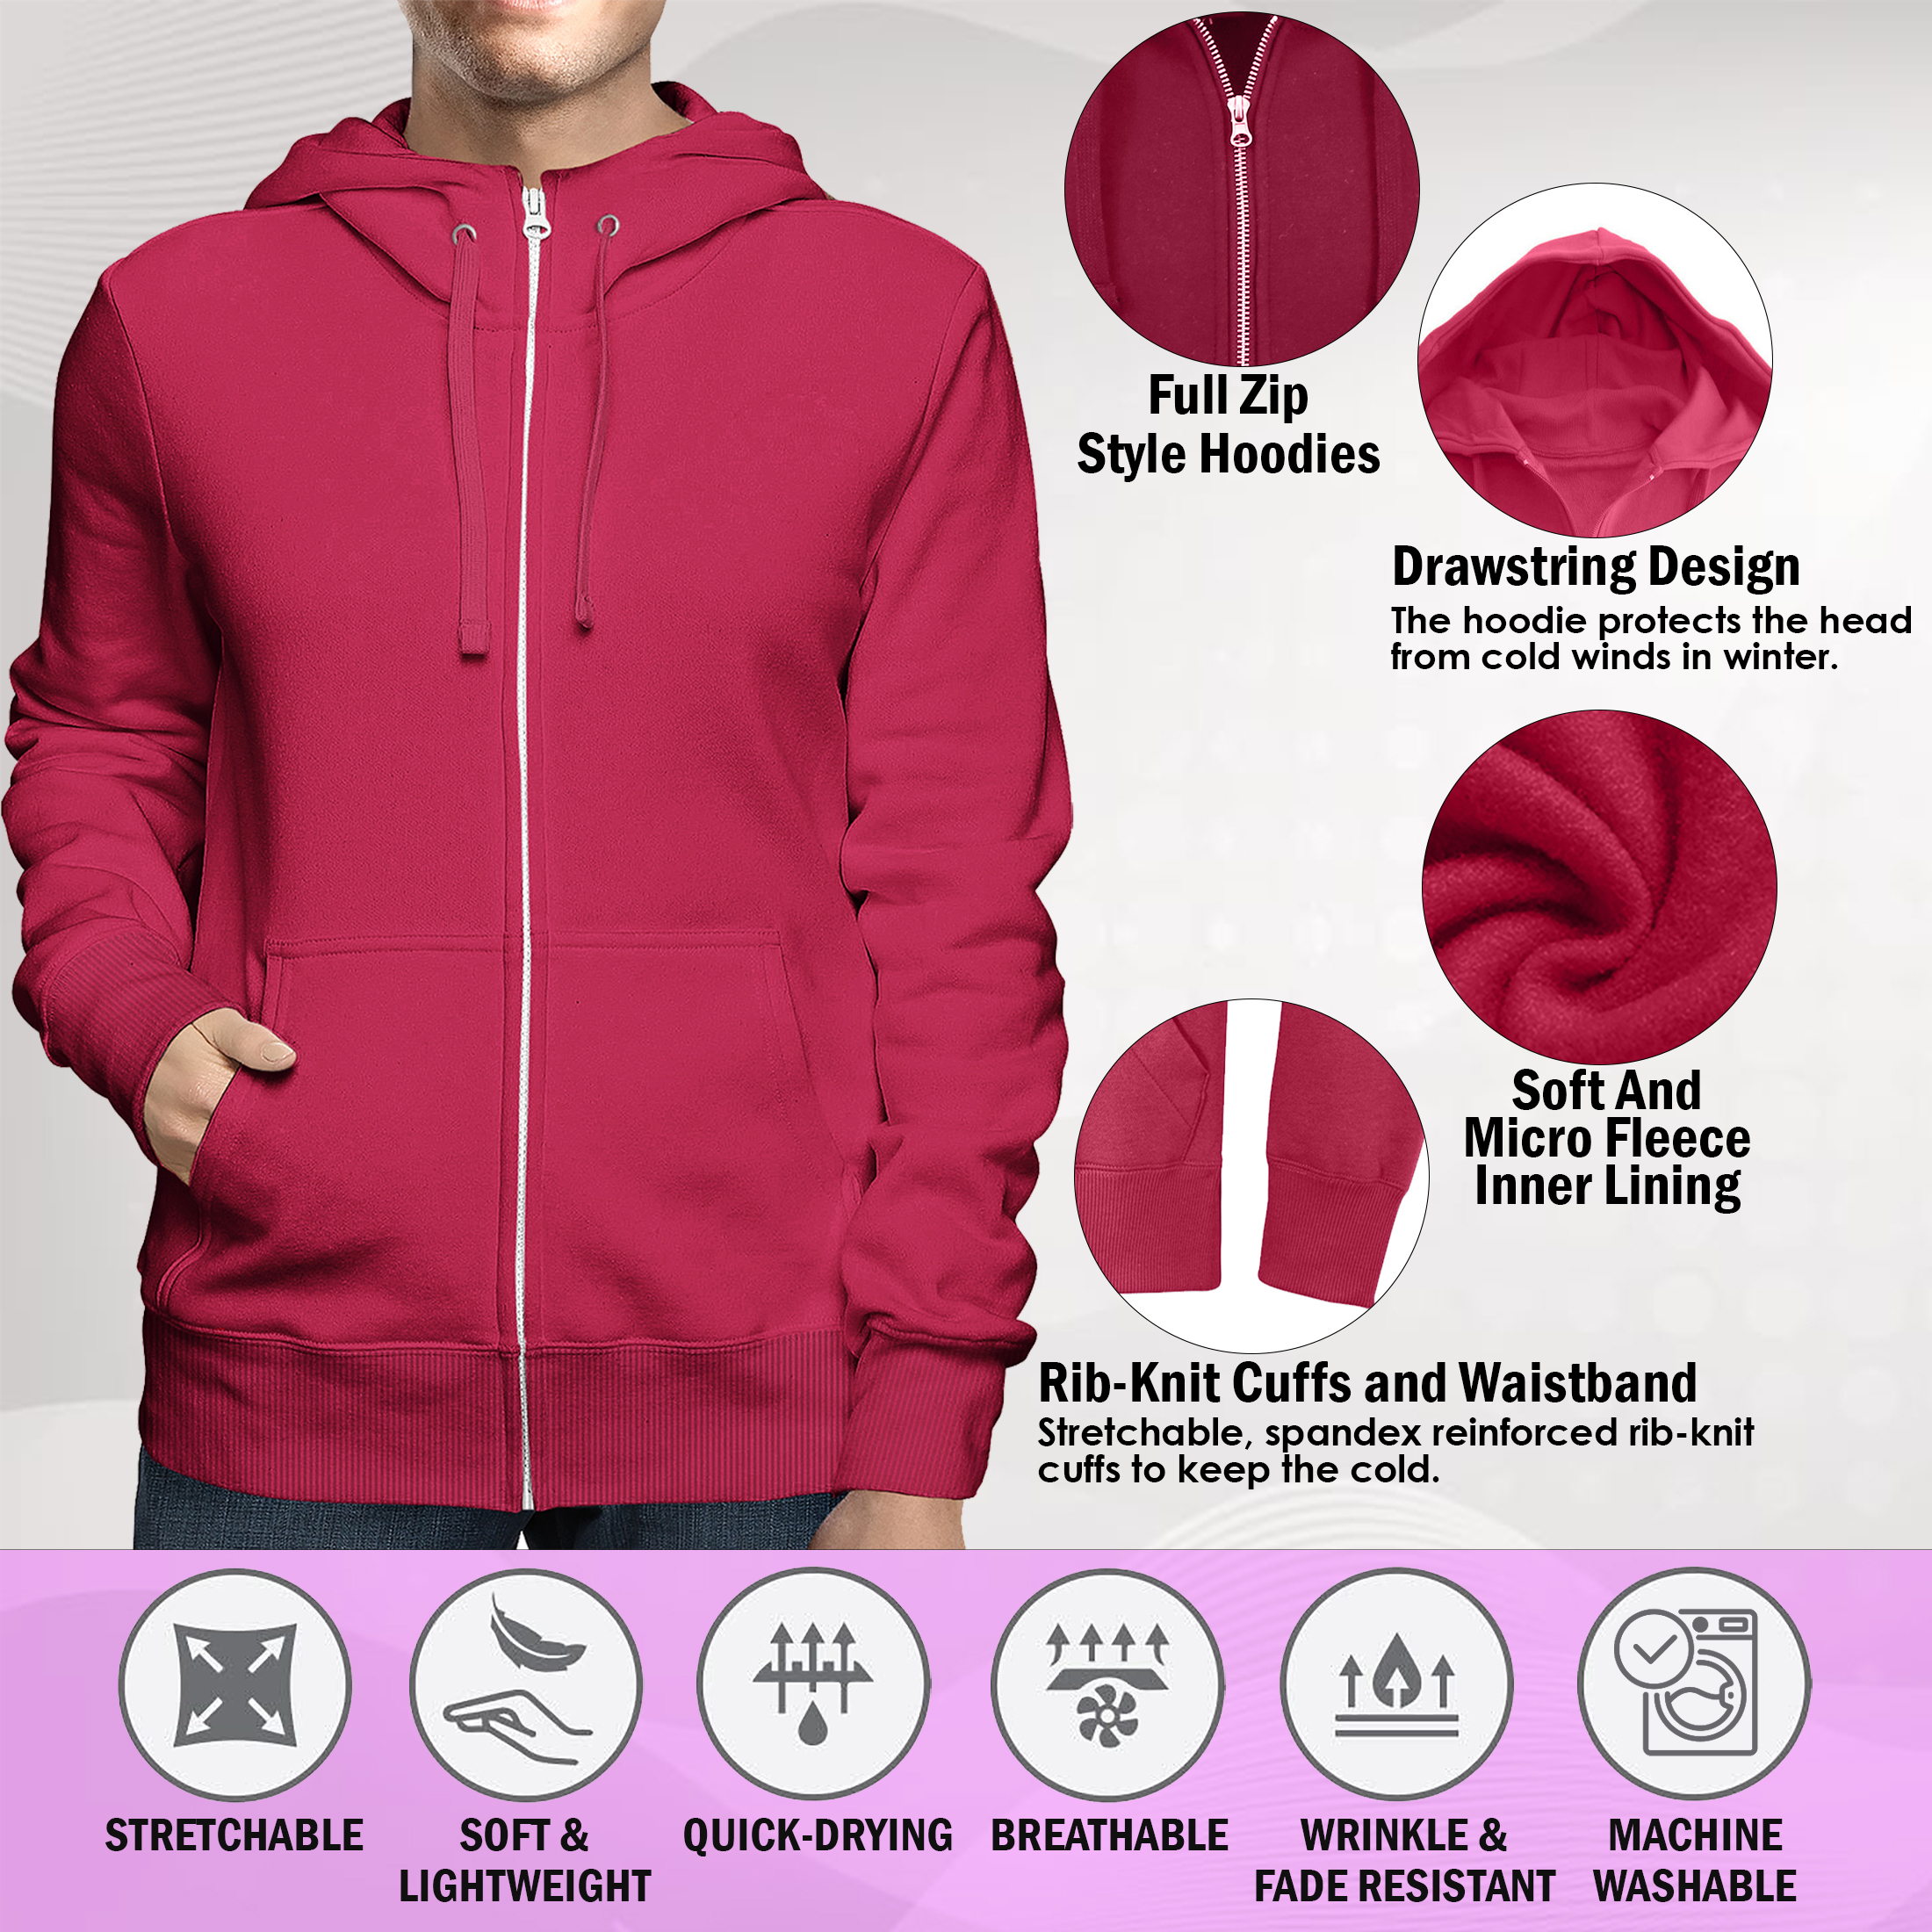 2-Pack: Men's Full Zip Up Fleece-Lined Hoodie Sweatshirt (Big & Tall Size Available) - Navy & Burgundy, X-large